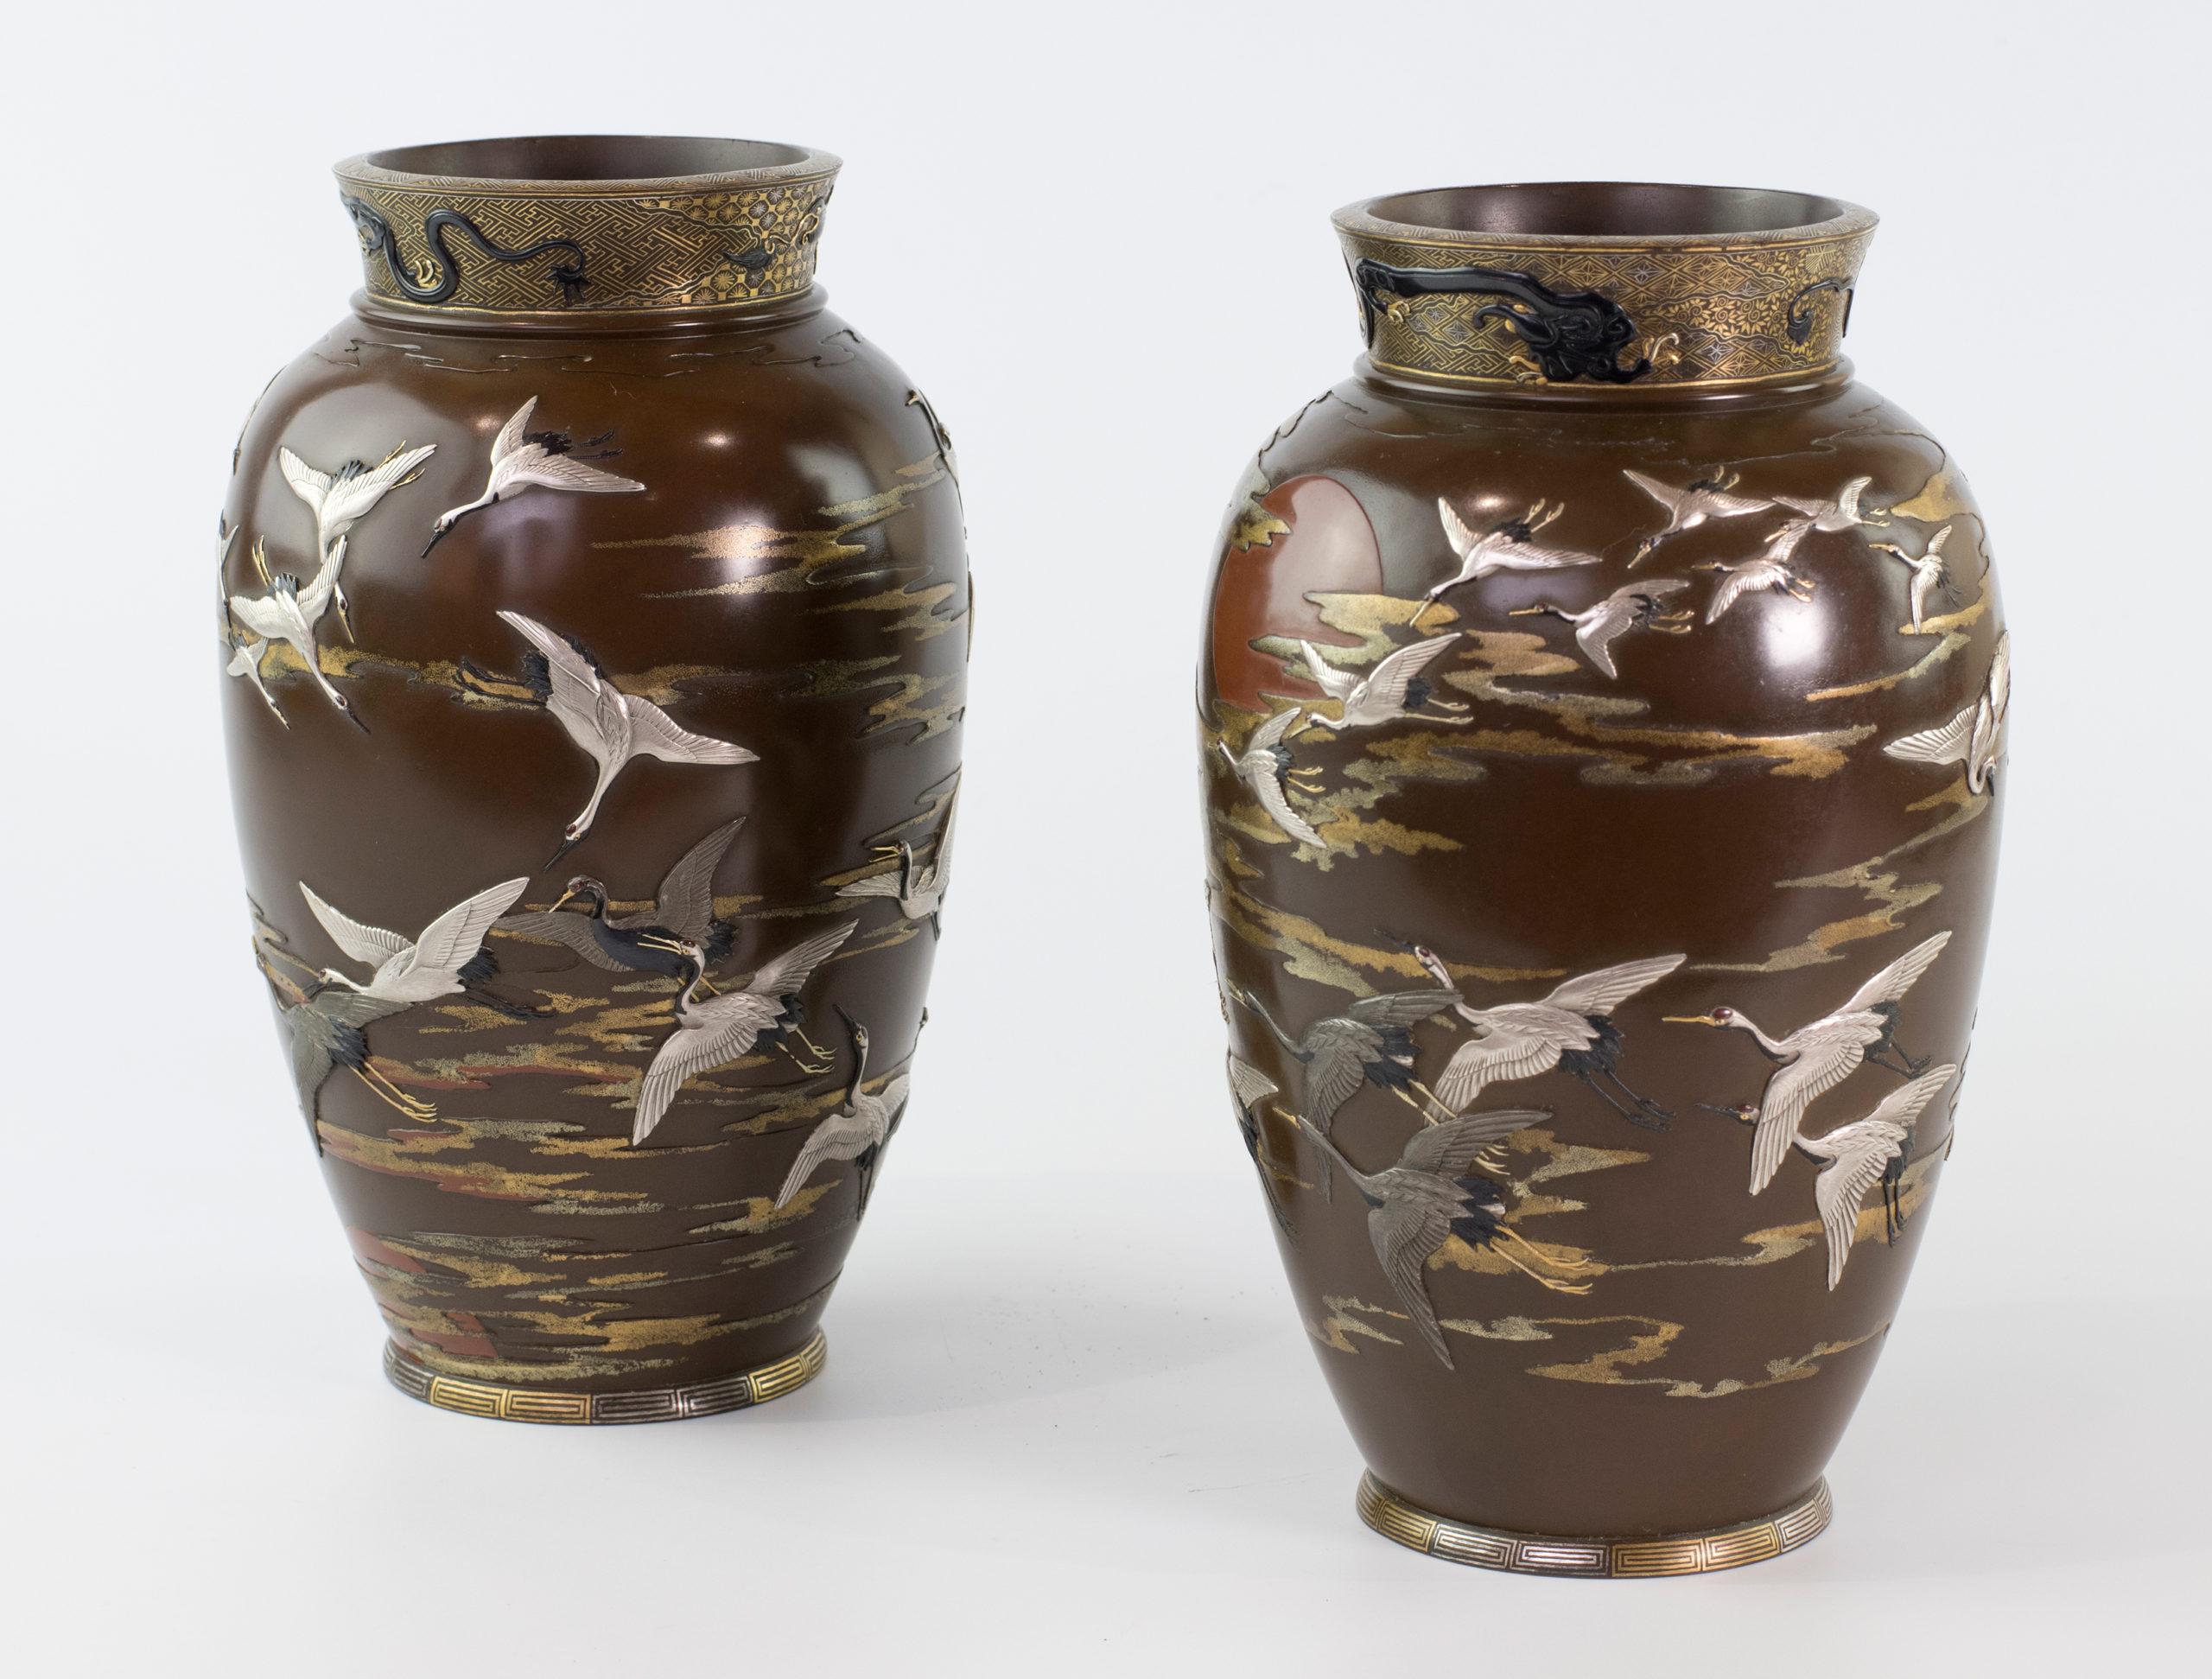 As part of our Japanese works of art collection we are delighted to offer this most unusual pair of Meiji Period 1868-1912, bronze and mixed metal vases, each individual vase depicts a multitude of silver, shibuichi and mixed alloy Manchurian cranes